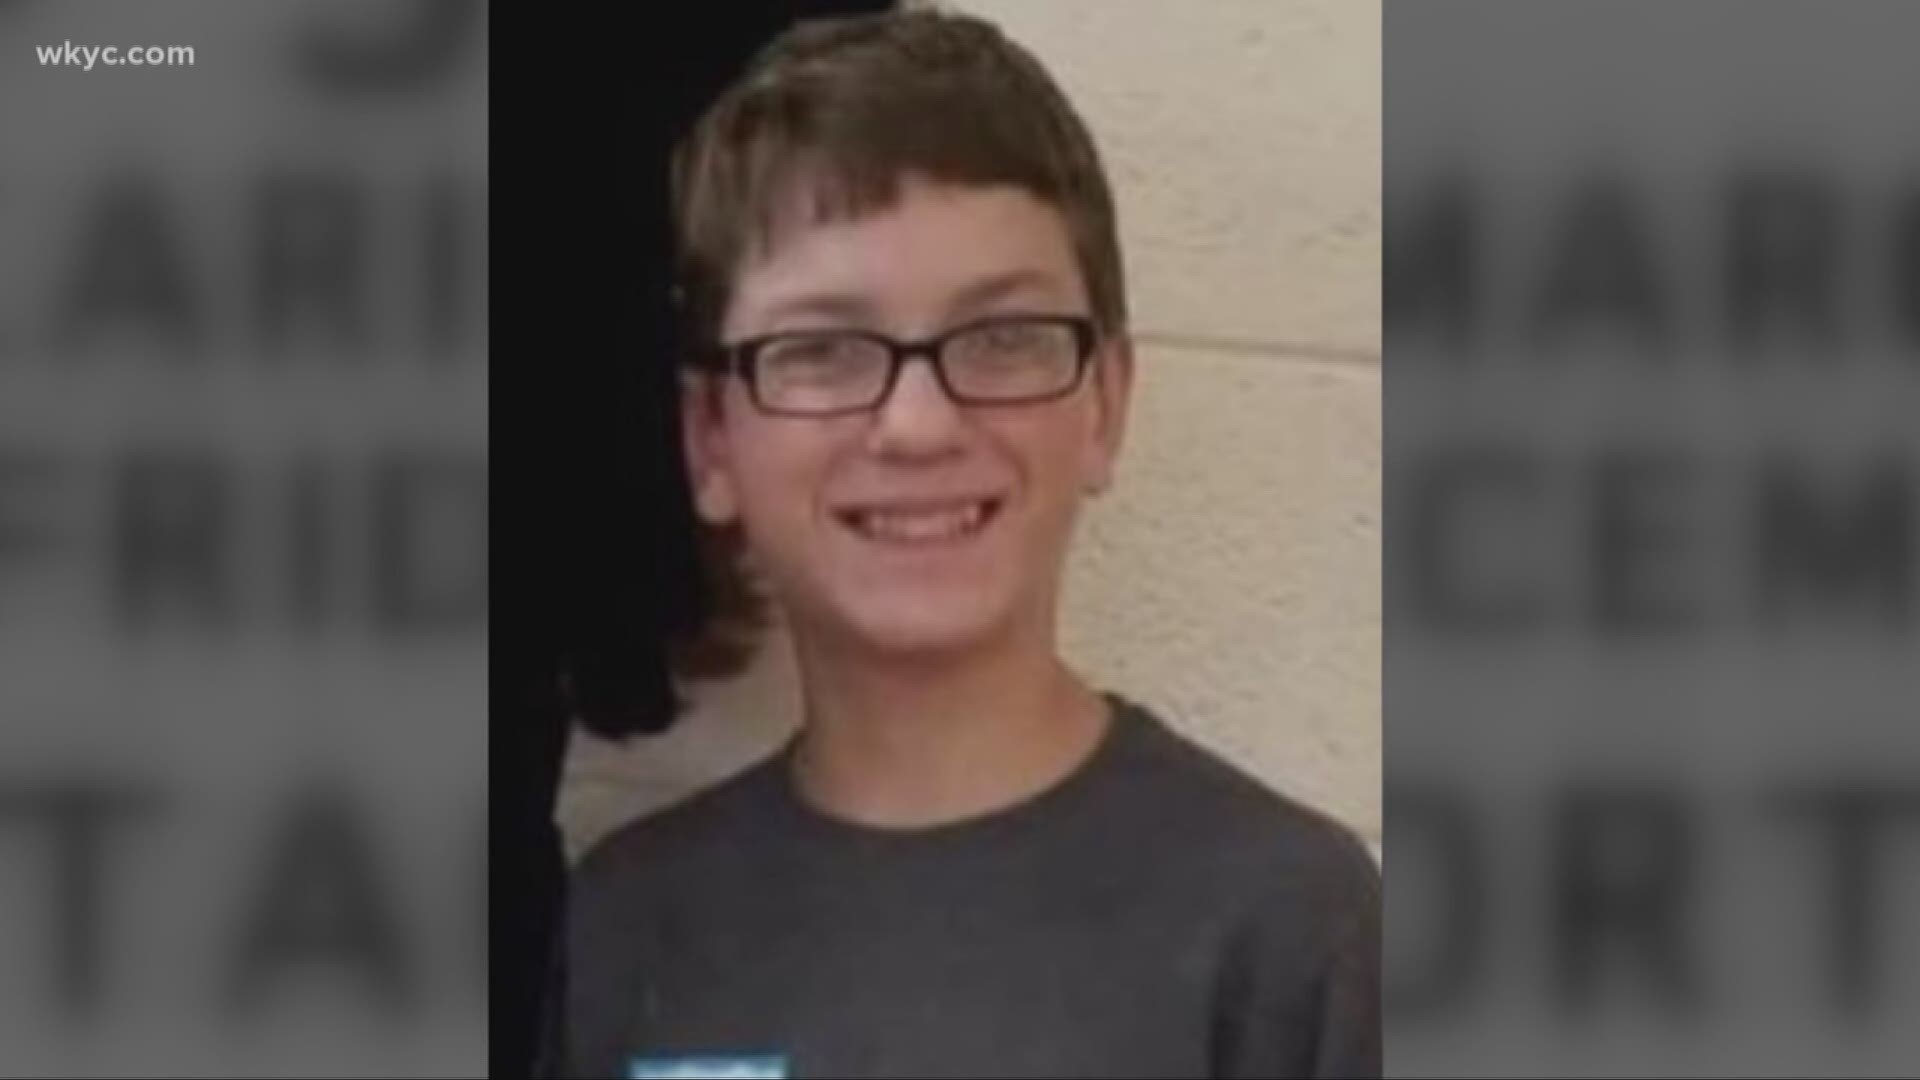 A volunteer search party will continue the search for Harley Dilly, the Port Clinton teen who has been missing for weeks. The group will meet at 9 a.m.